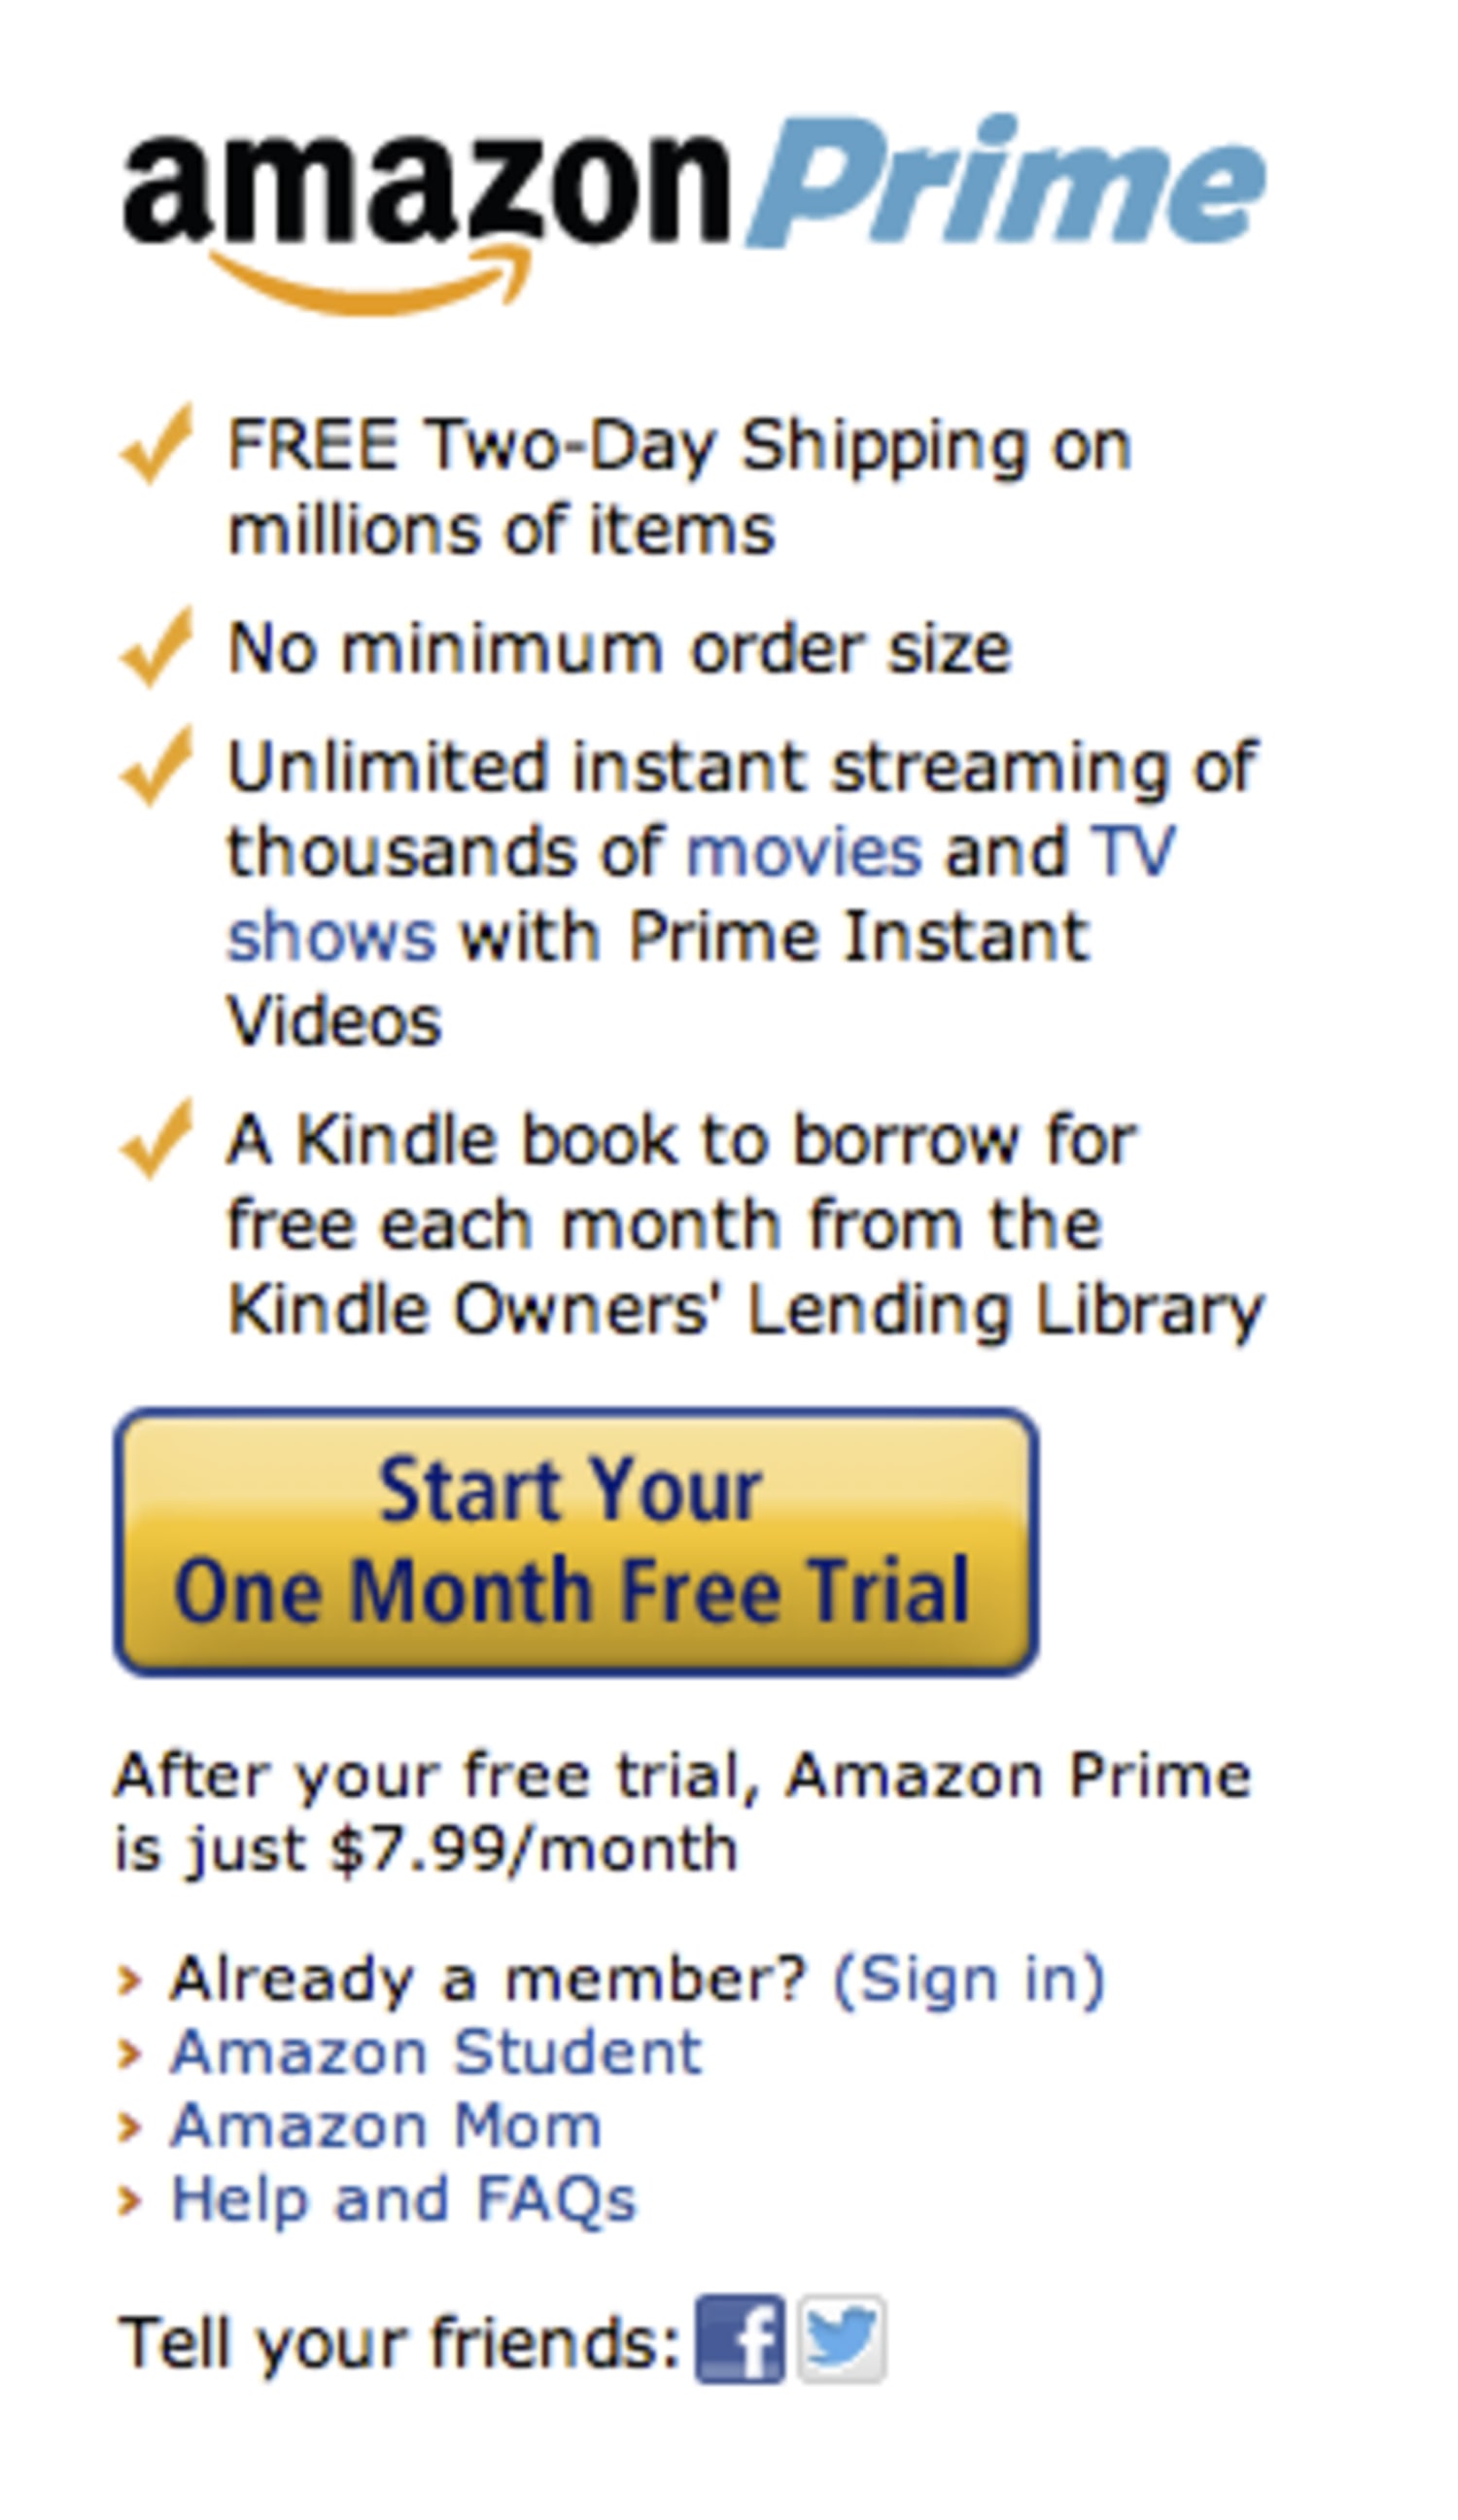 Prime plan now available at $7.99 per month